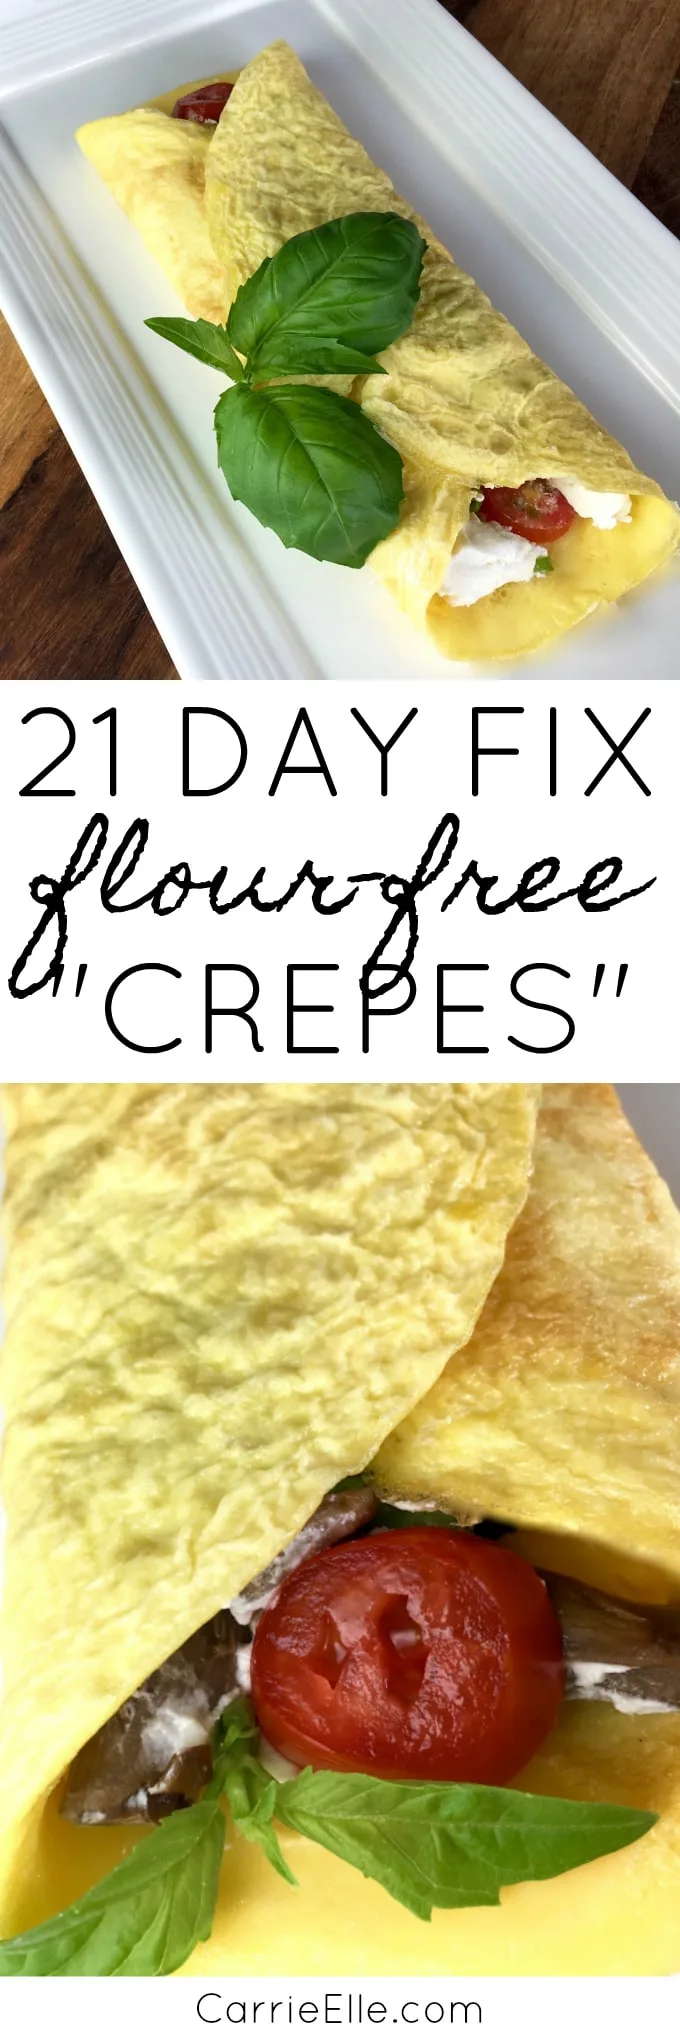 21 Day Fix Crepes